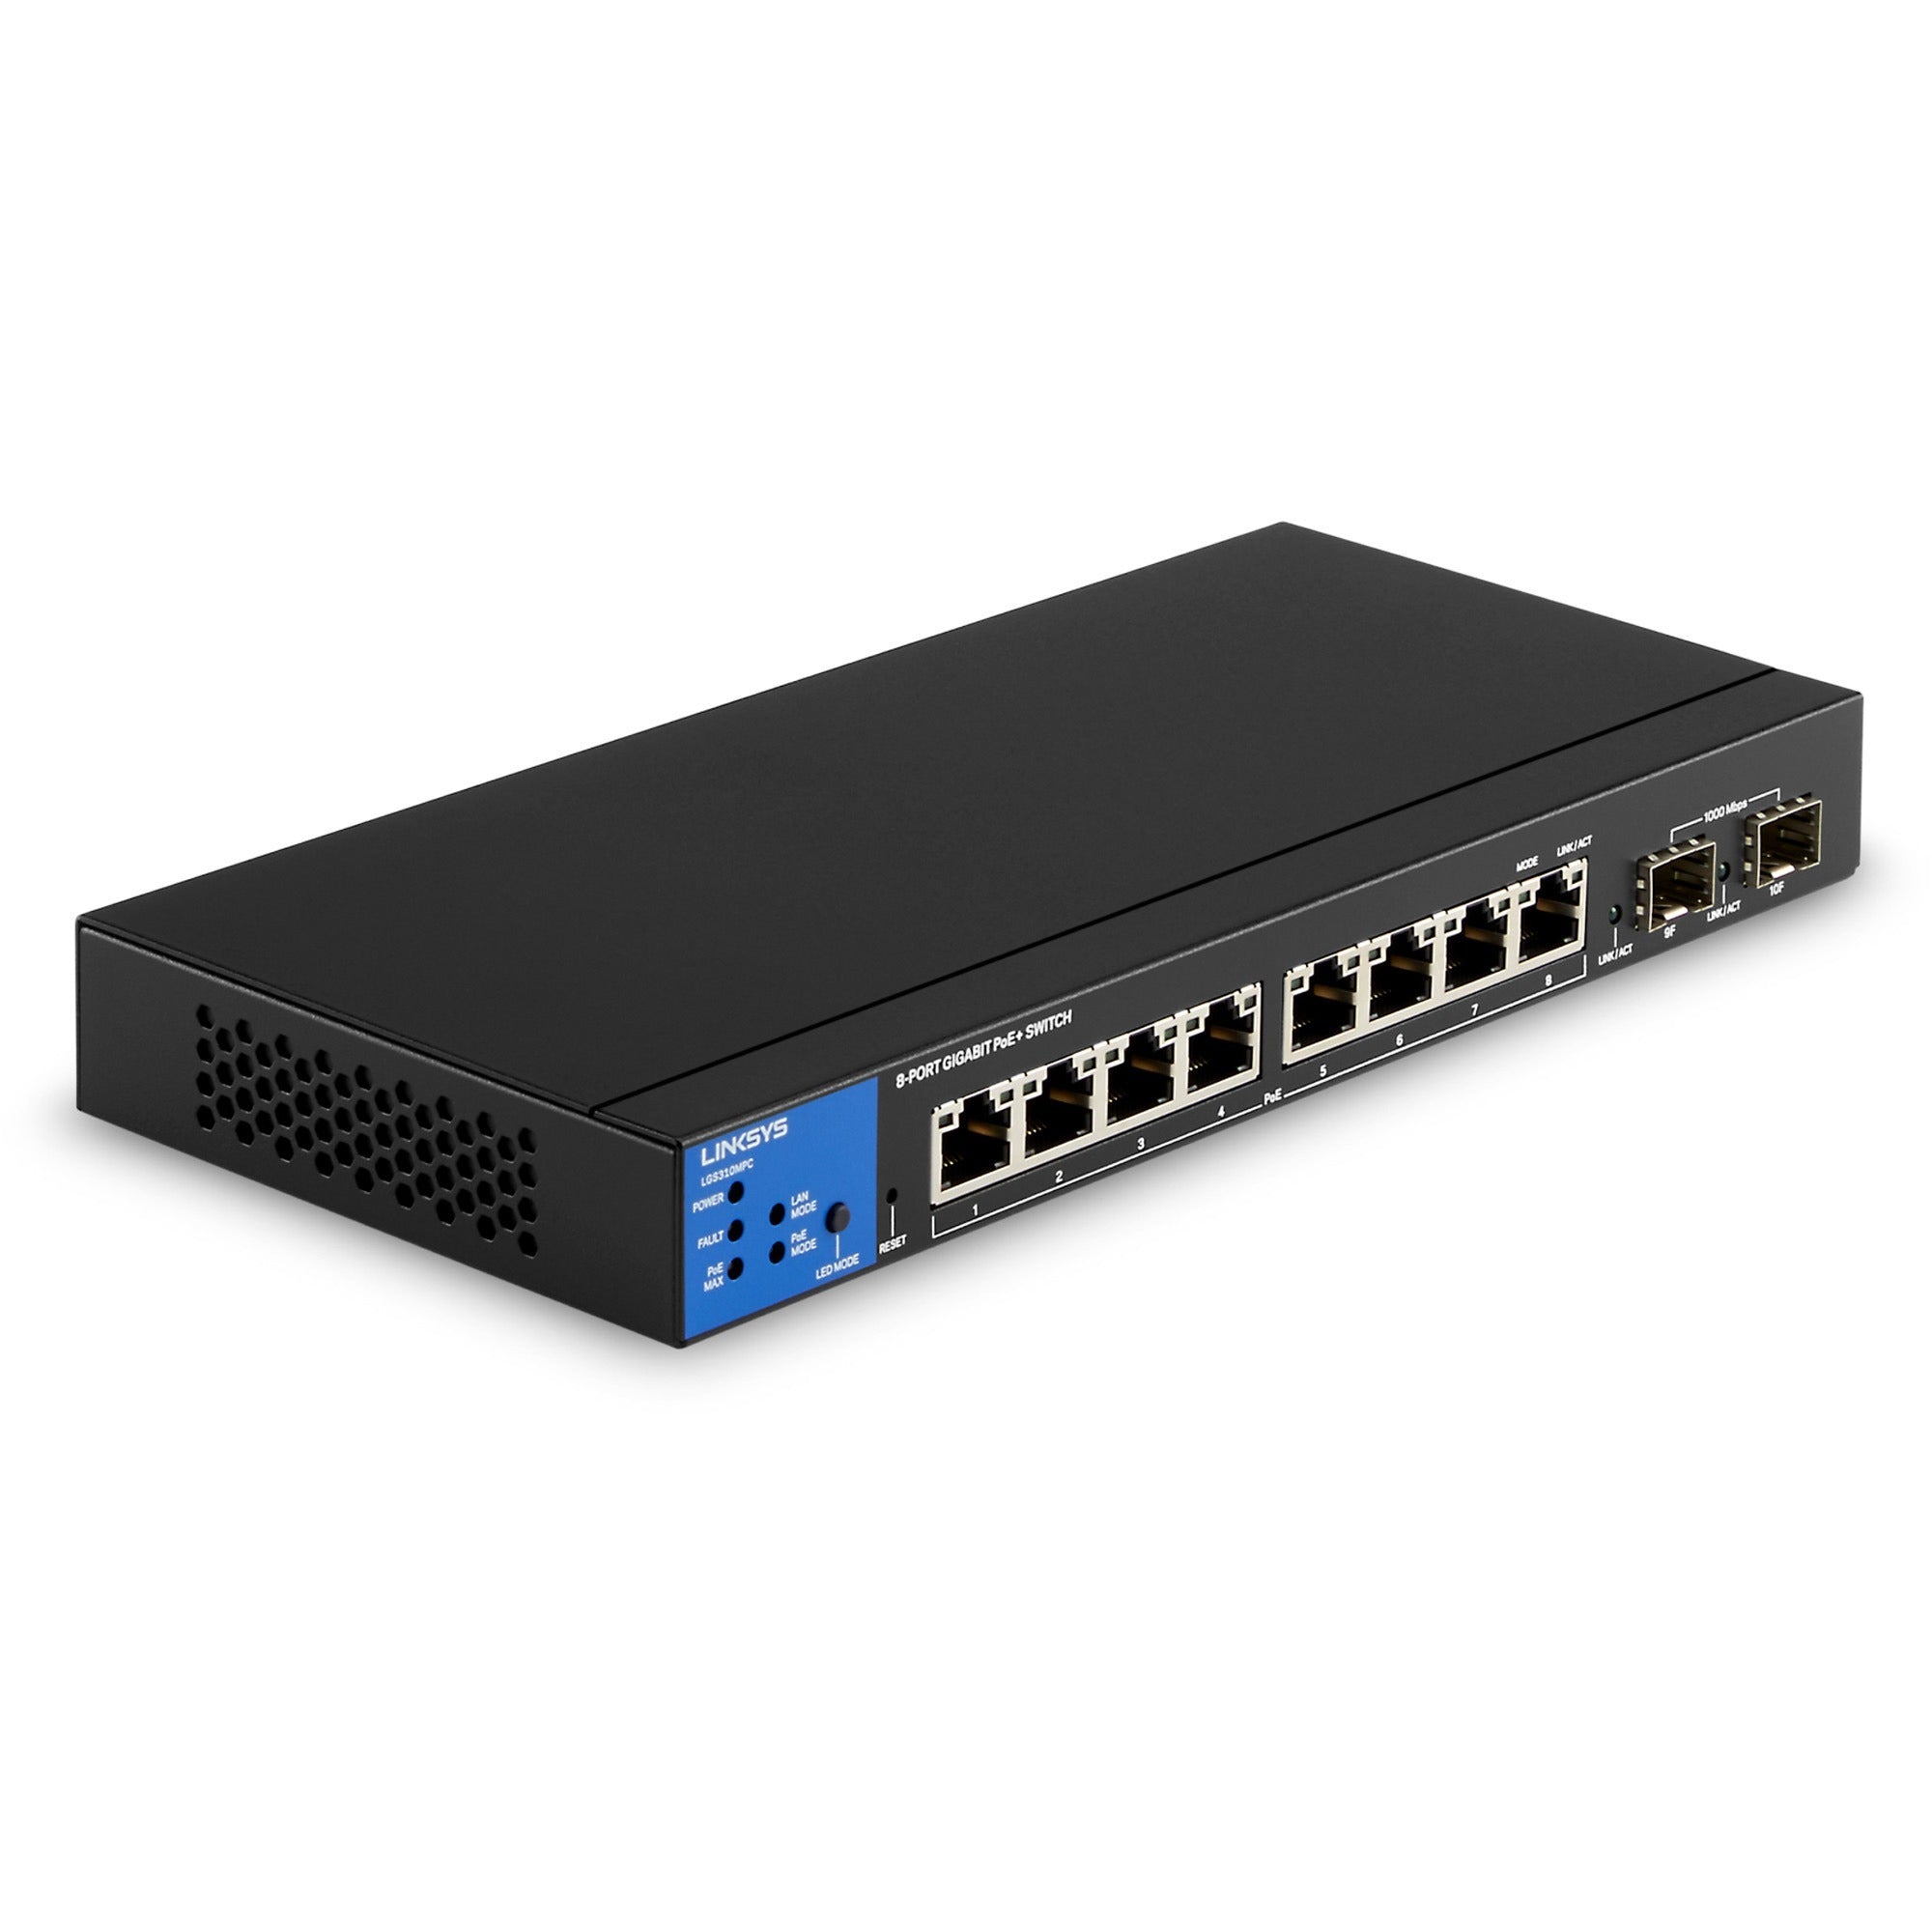 linksys-8-port-managed-gigabit-poe+-switch-with-2-1g-sfp-uplinks-8-ports-manageable-taa-compliant-3-layer-supported-modular-2-sfp-slots-110-w-poe-budget-optical-fiber-twisted-pair-poe-ports-5-year-limited-warranty_lnklgs310mpc - 1